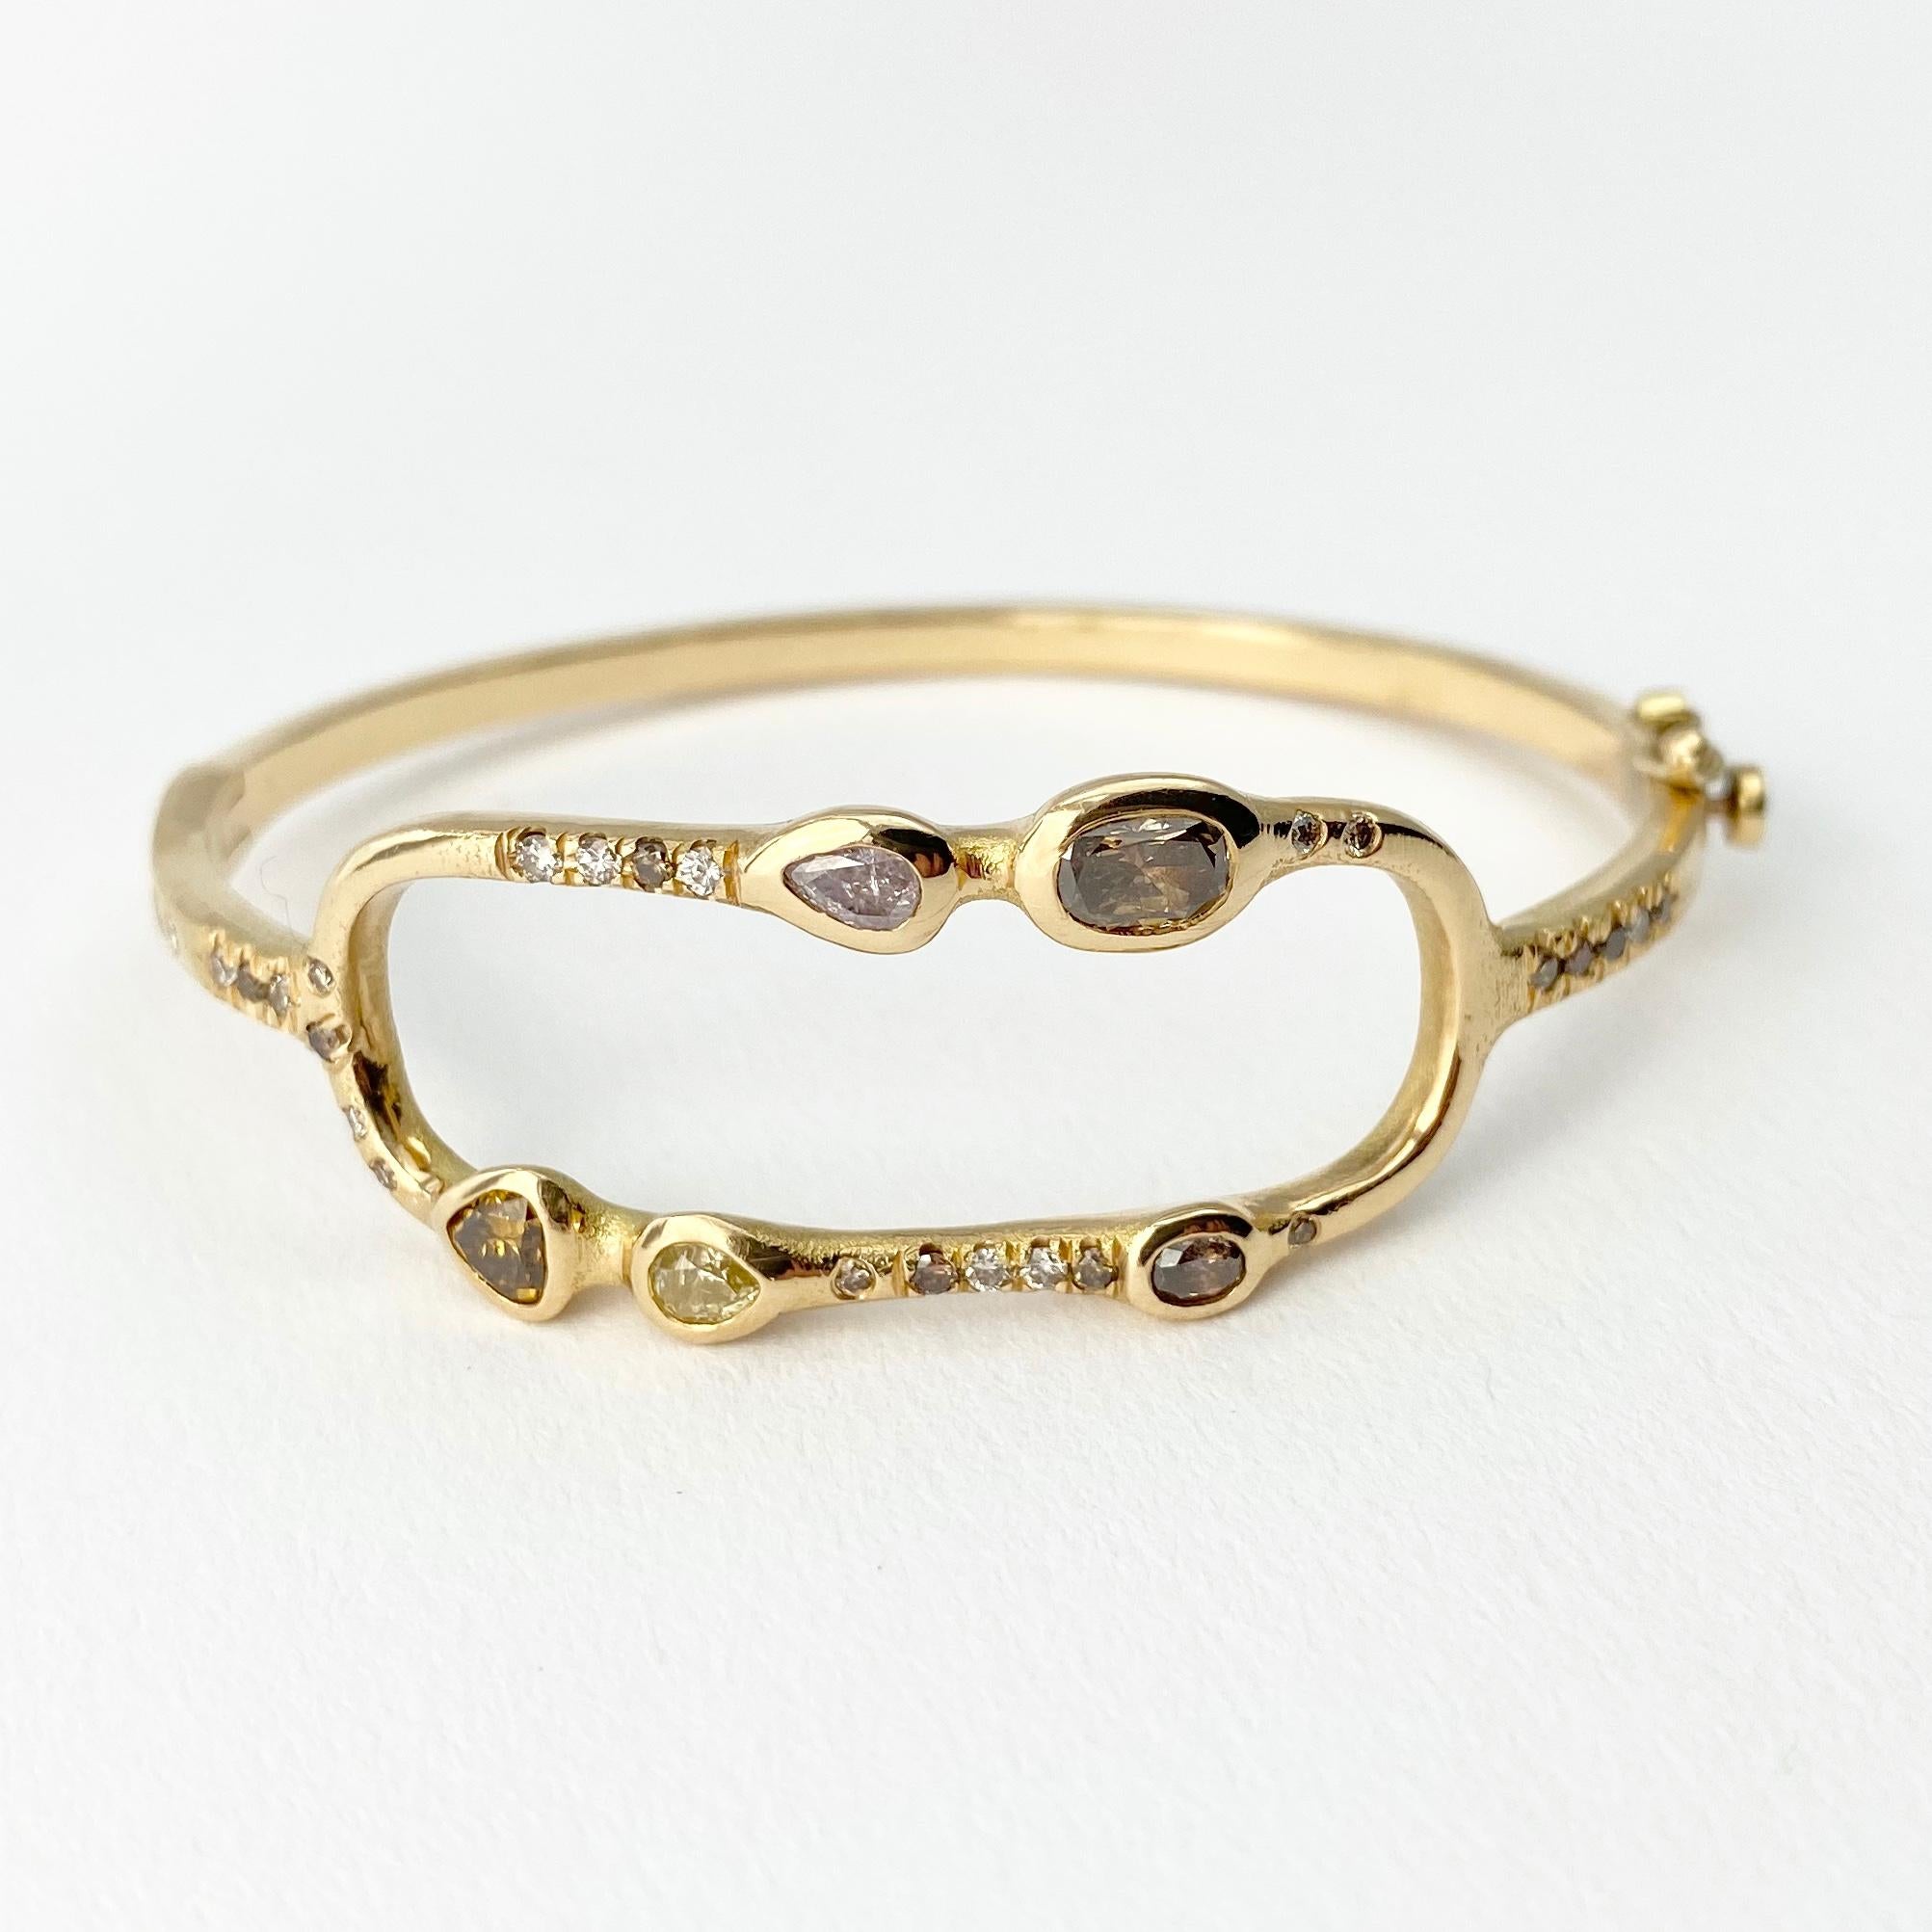 The Pathway bangle bracelet, from our Barefoot Collection, is hand-crafted with 18-karat recycled yellow gold, and features five bezel-set colored diamonds (three pear shape, and two oval),; and 27 round champagne accent diamonds. Finished with a